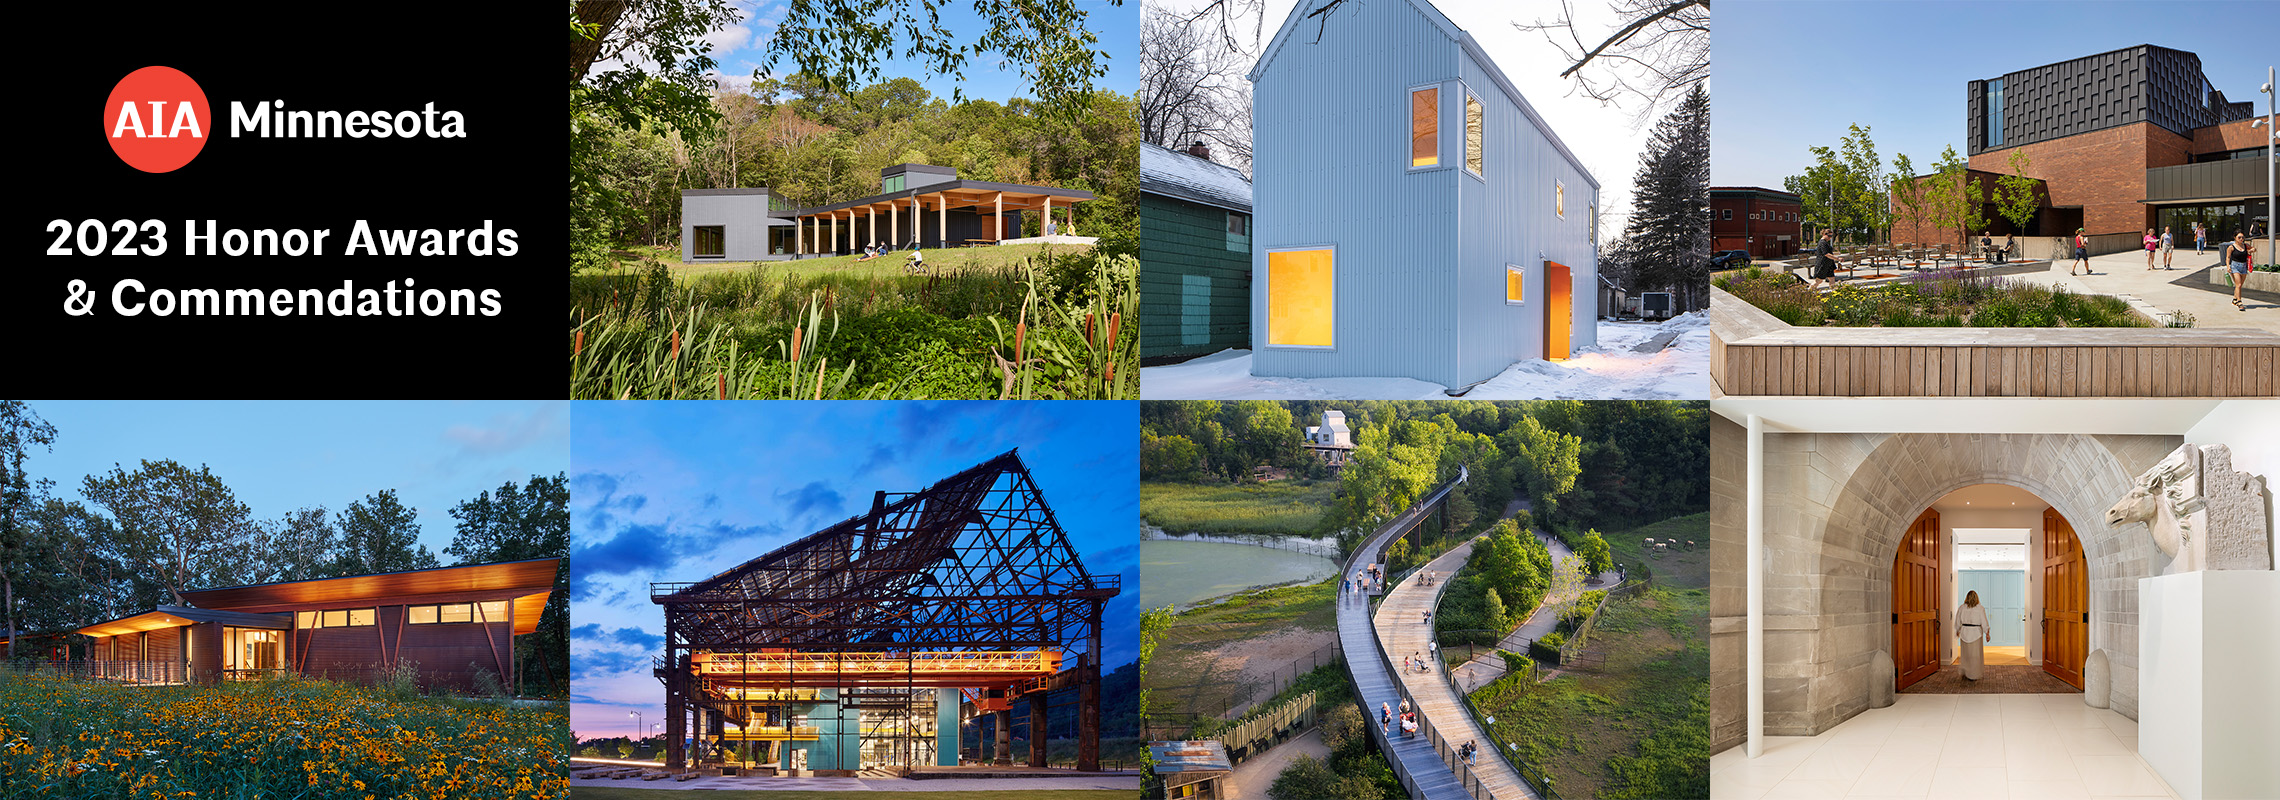 AIA Minnesota Announces 2023 Honor Awards and Commendations for Design Excellence